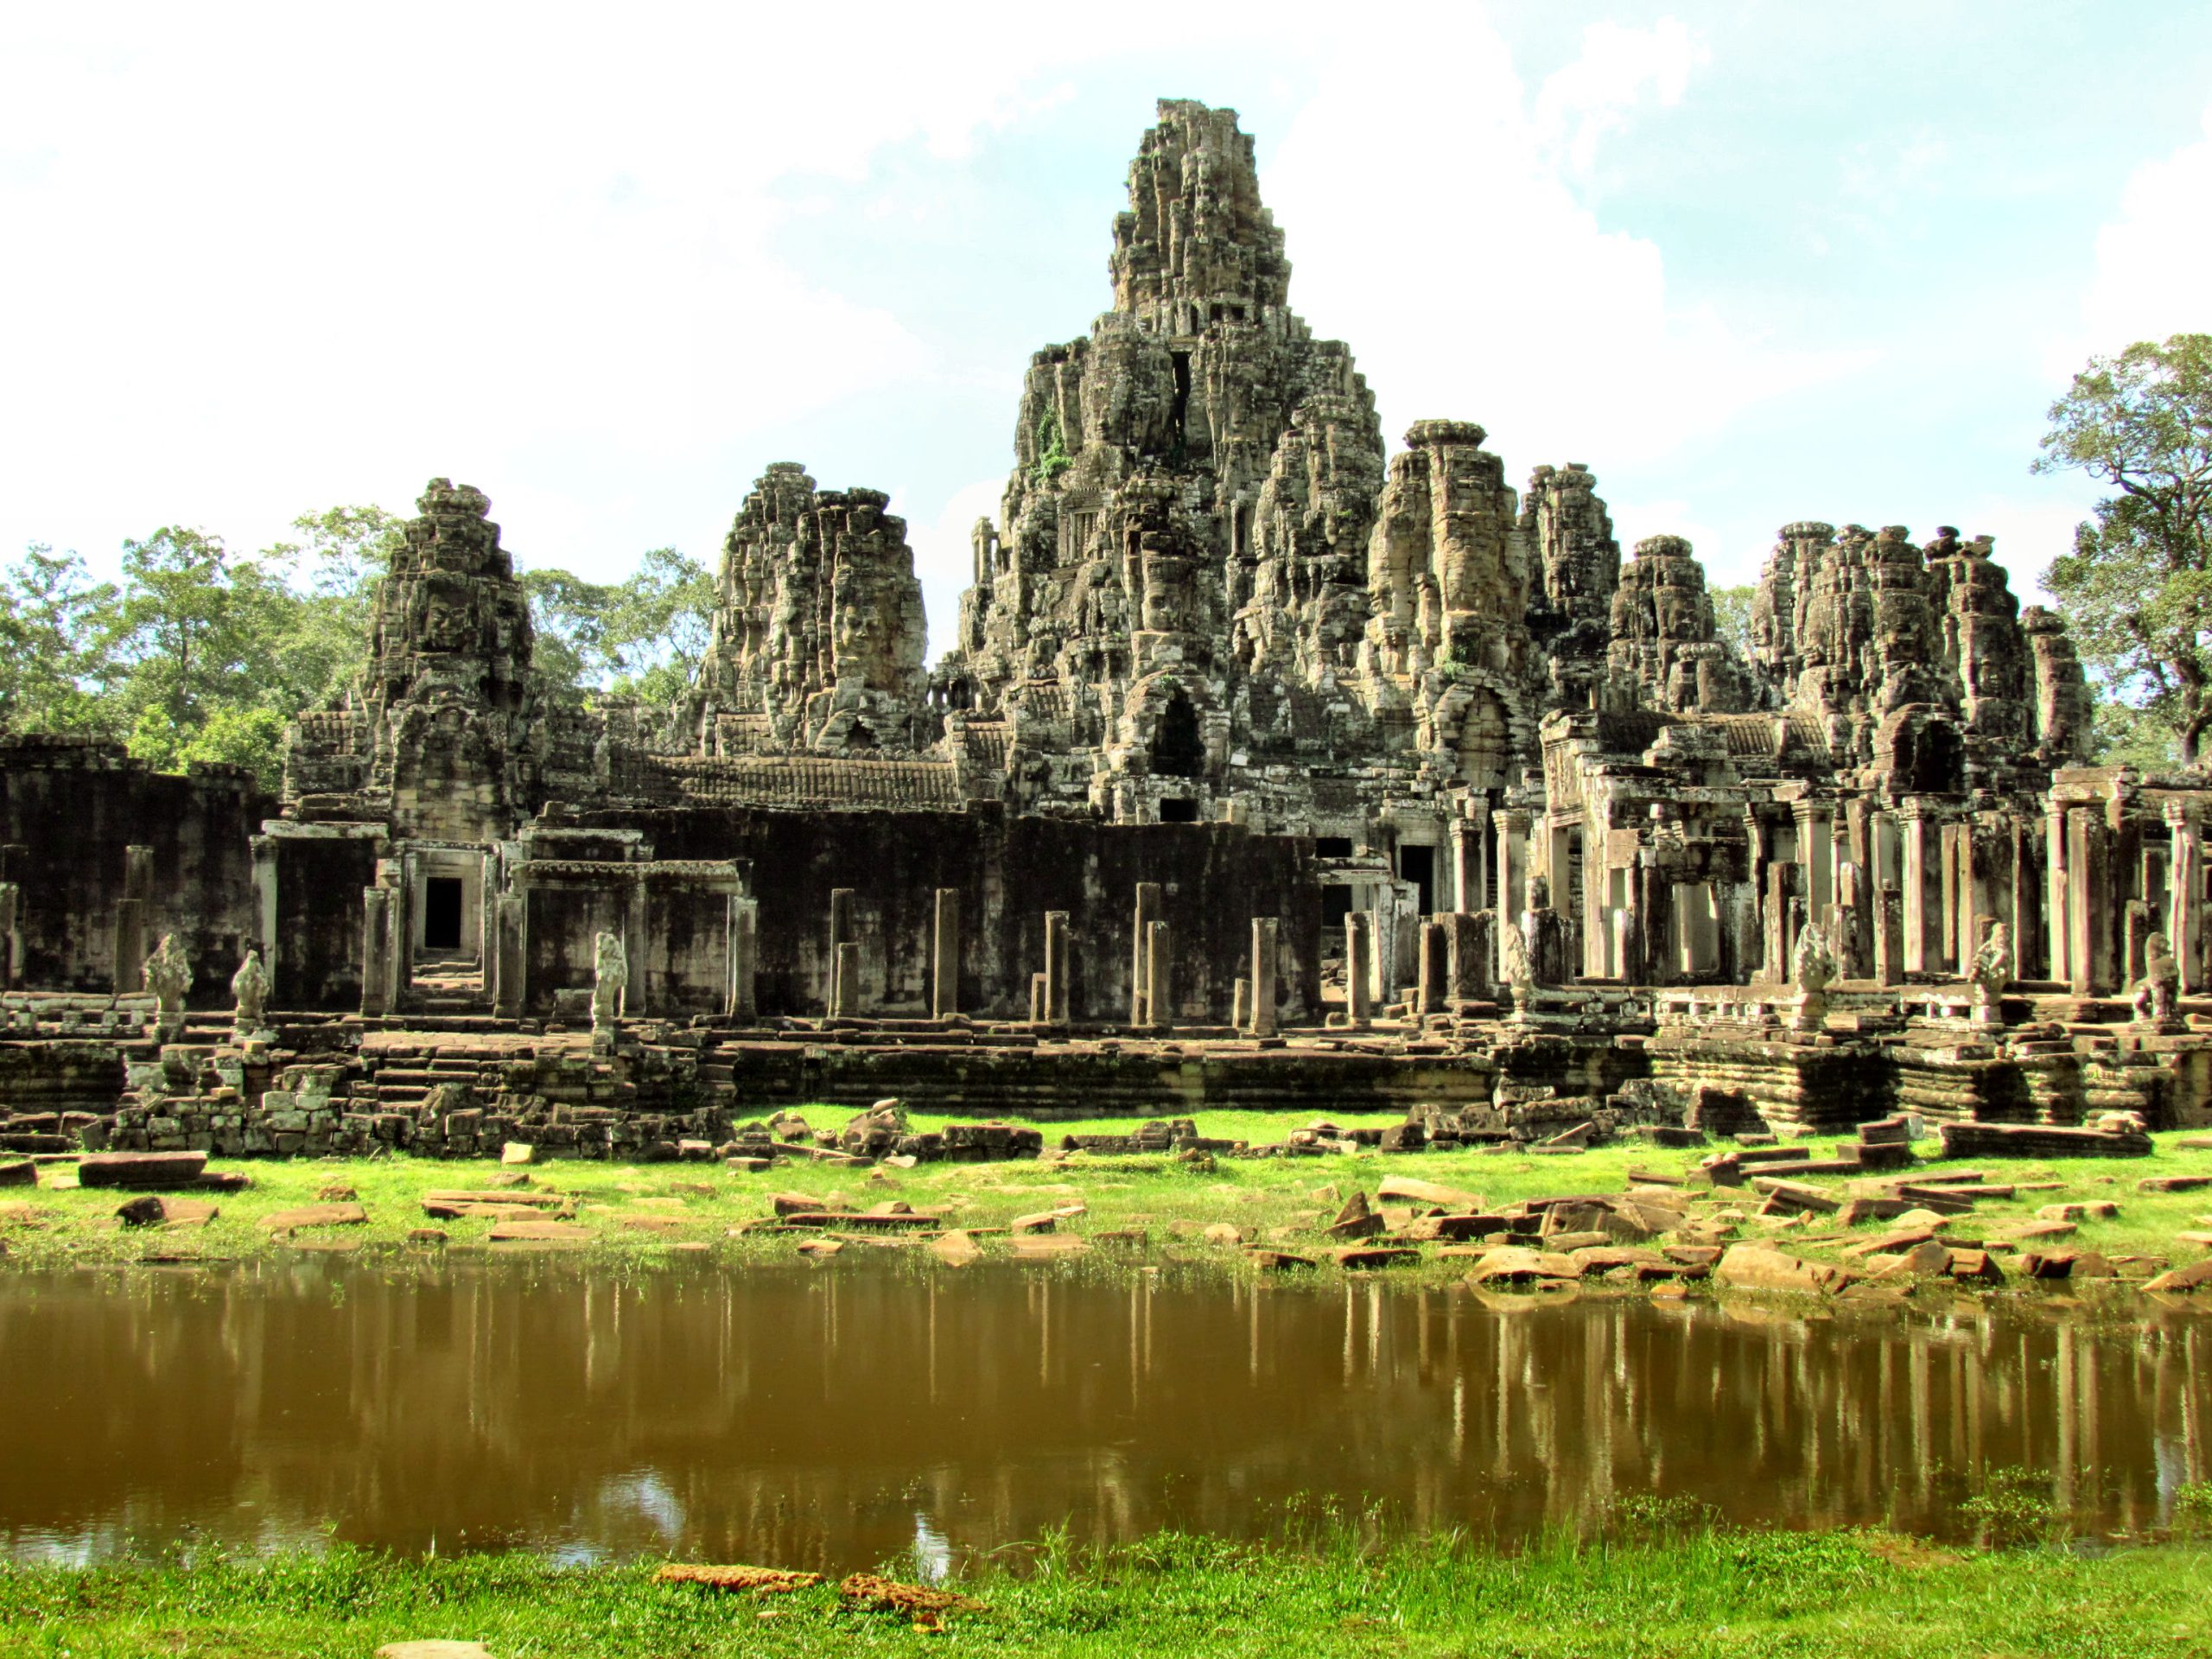 must see, do and eat in Cambodia